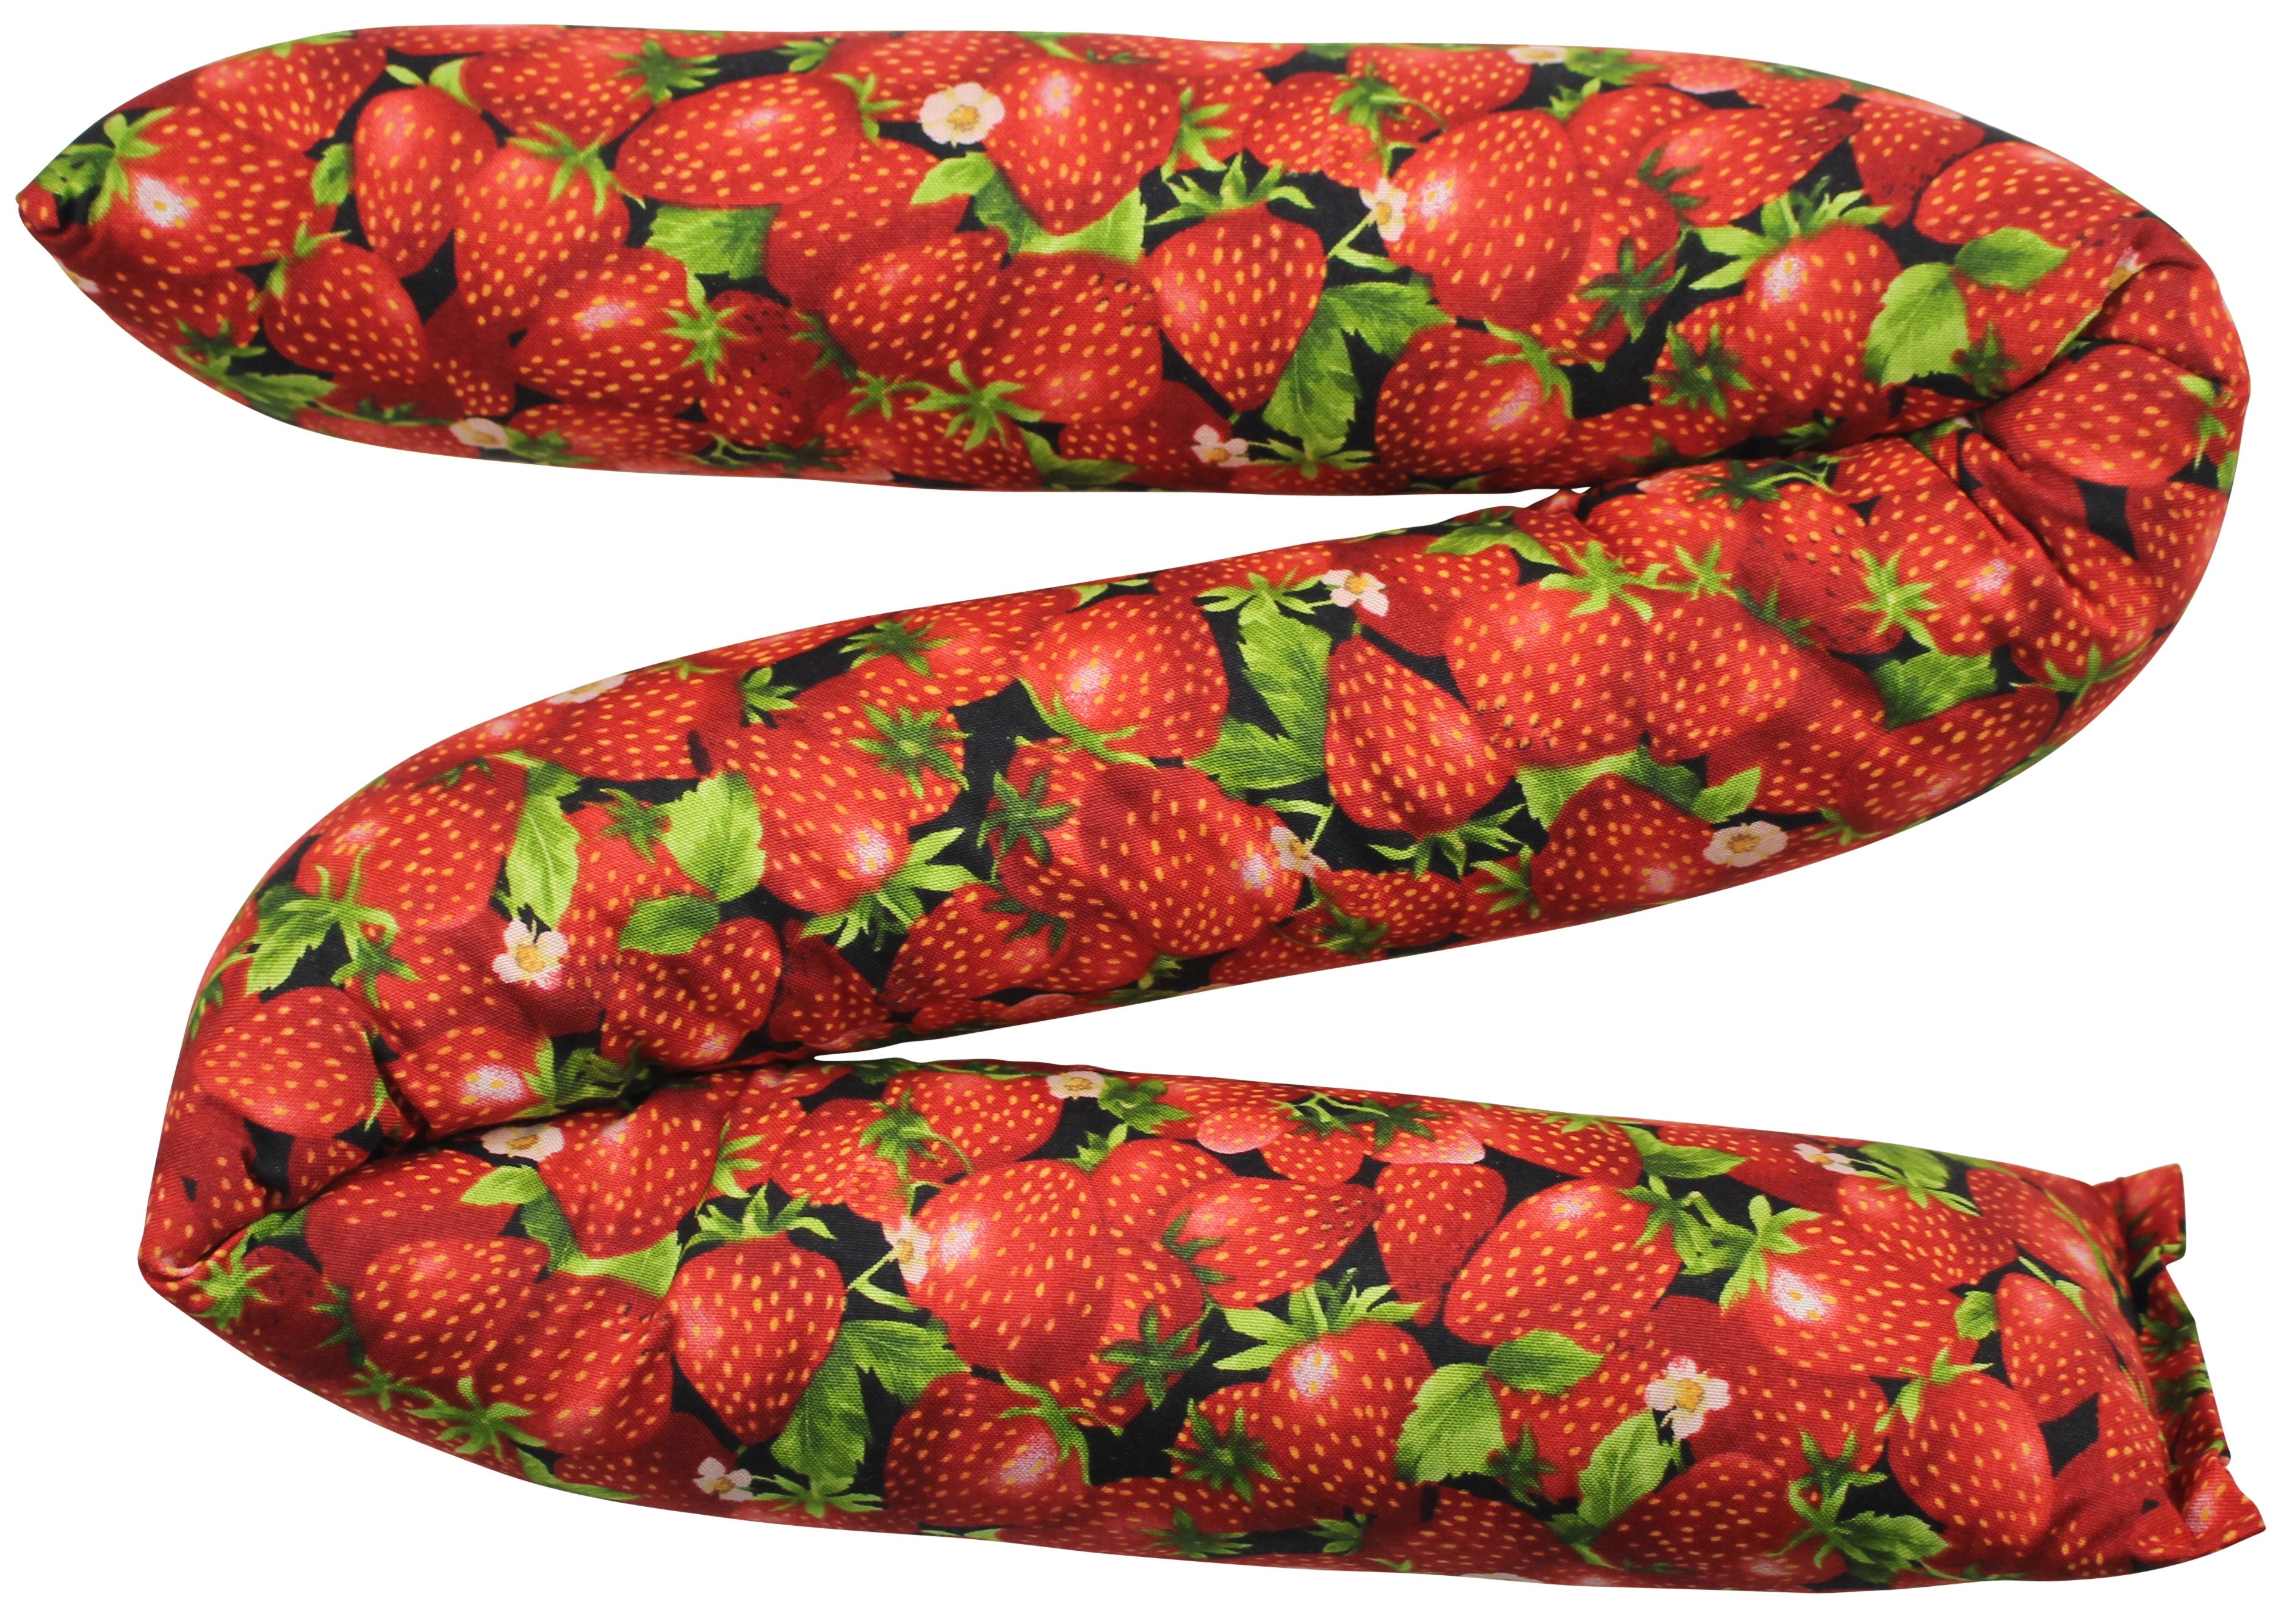 Draft Stopper Extra Large 4 inch diameter Strawberries Length Fits a 36" Space